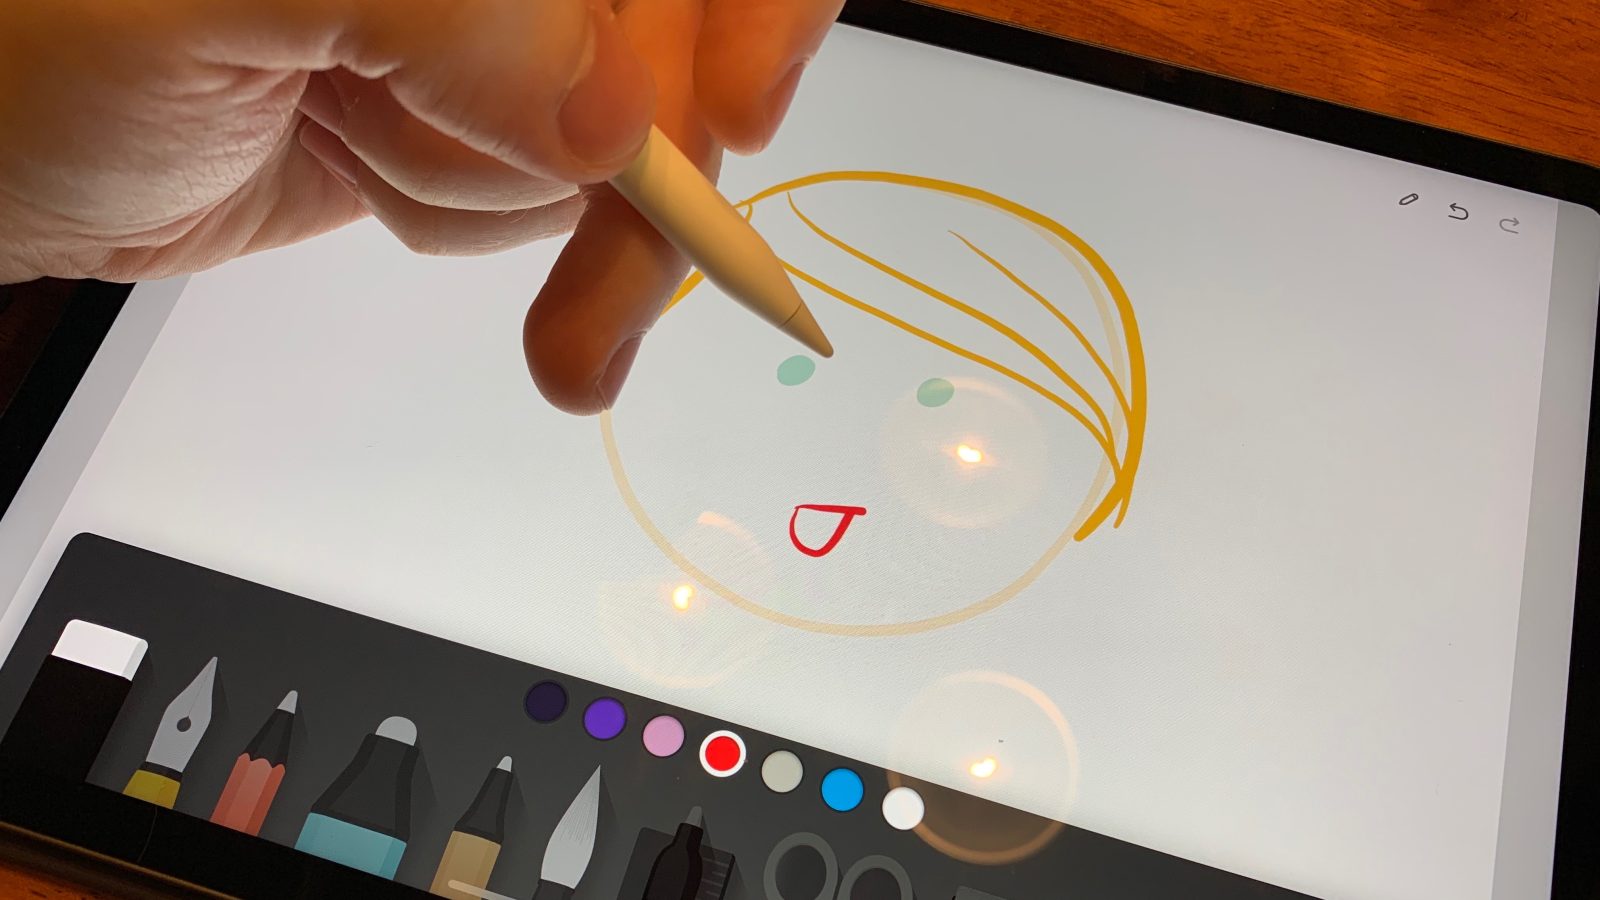 Creative Ipad App For Drawing Sketches for Kids